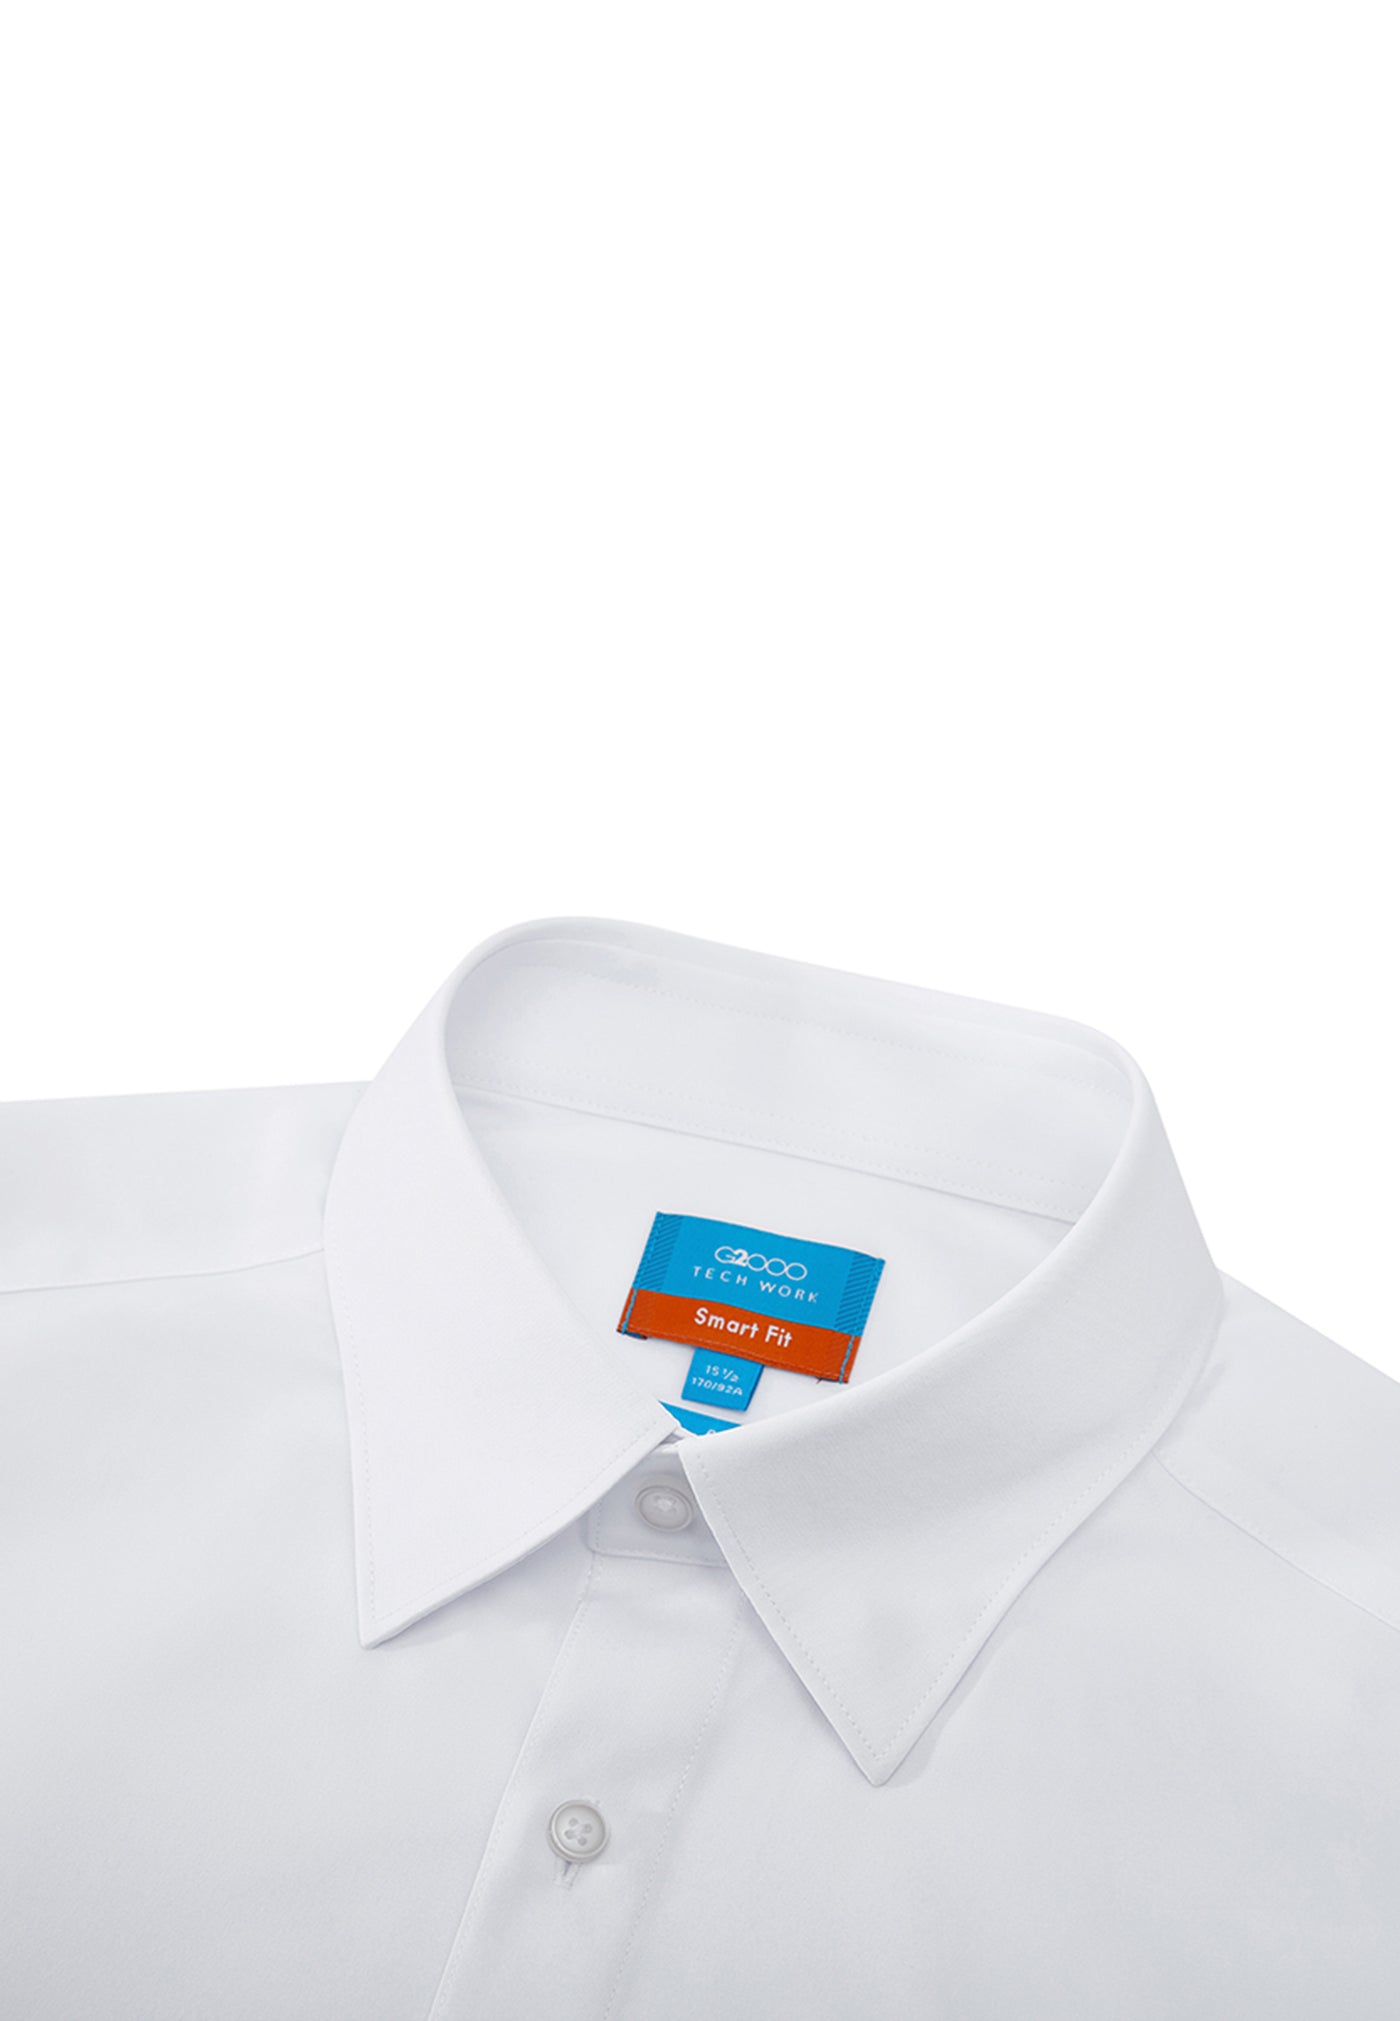 Men Clothing Dry ∙ Wicking & Stretch Shirt Smart Fit